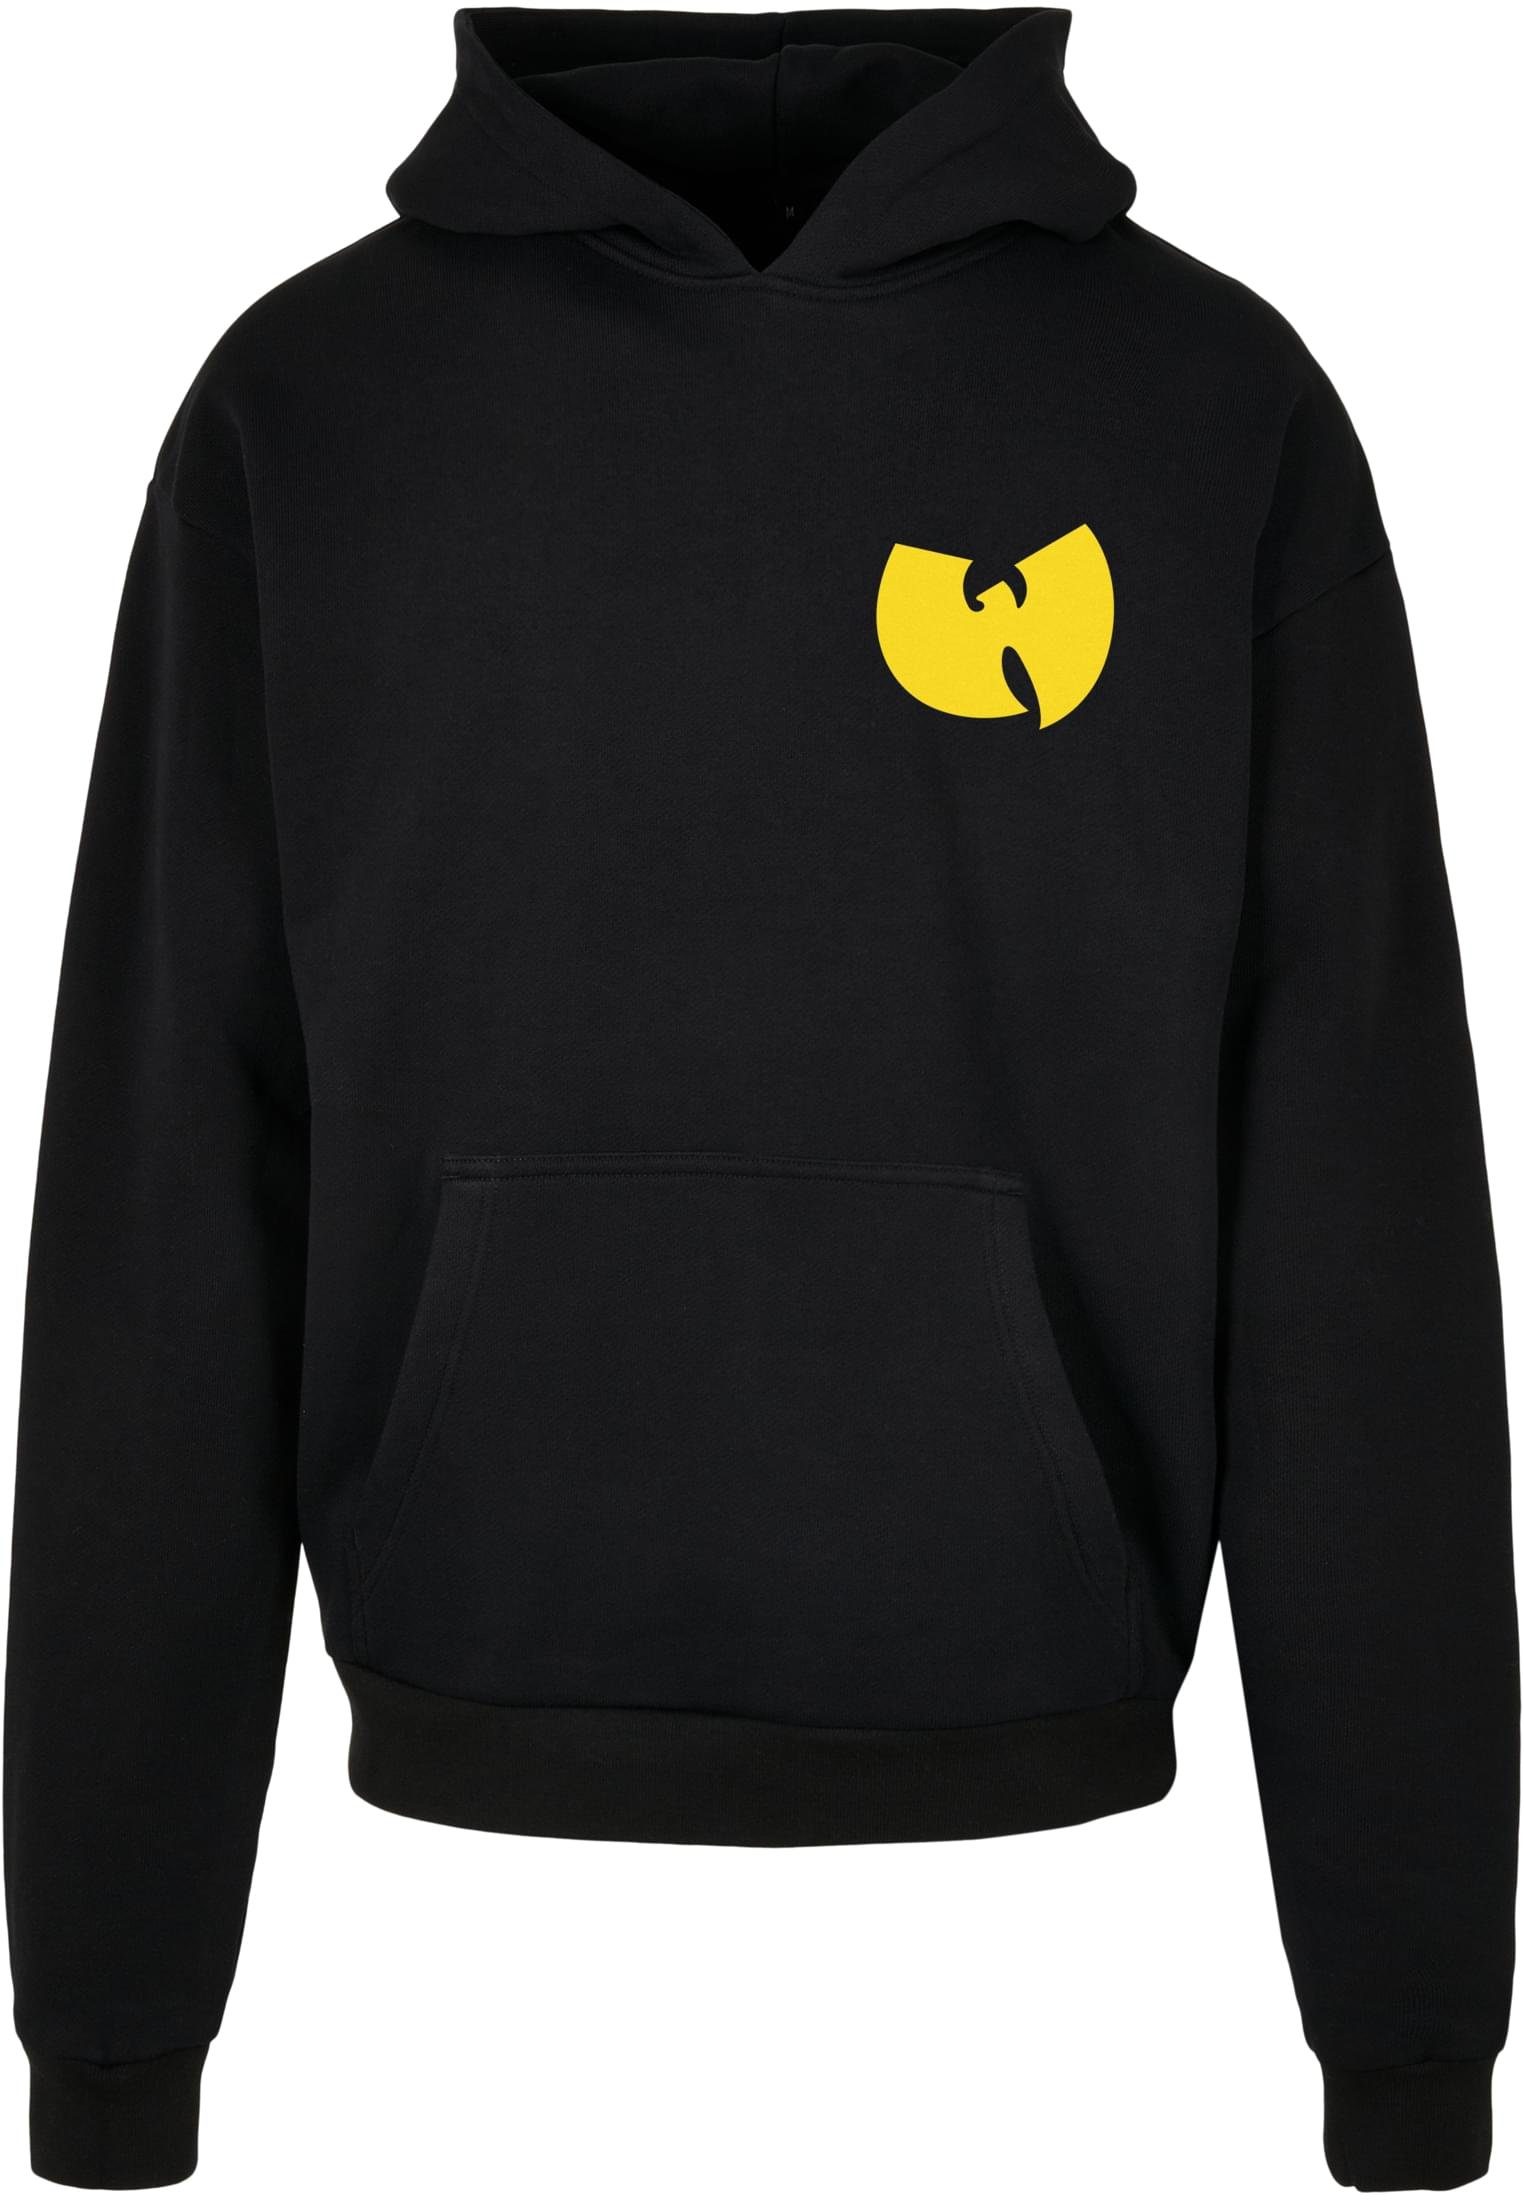 Upscale by Mister Tee Sweater Herren WU Tang Loves NY Hoody (1-tlg)